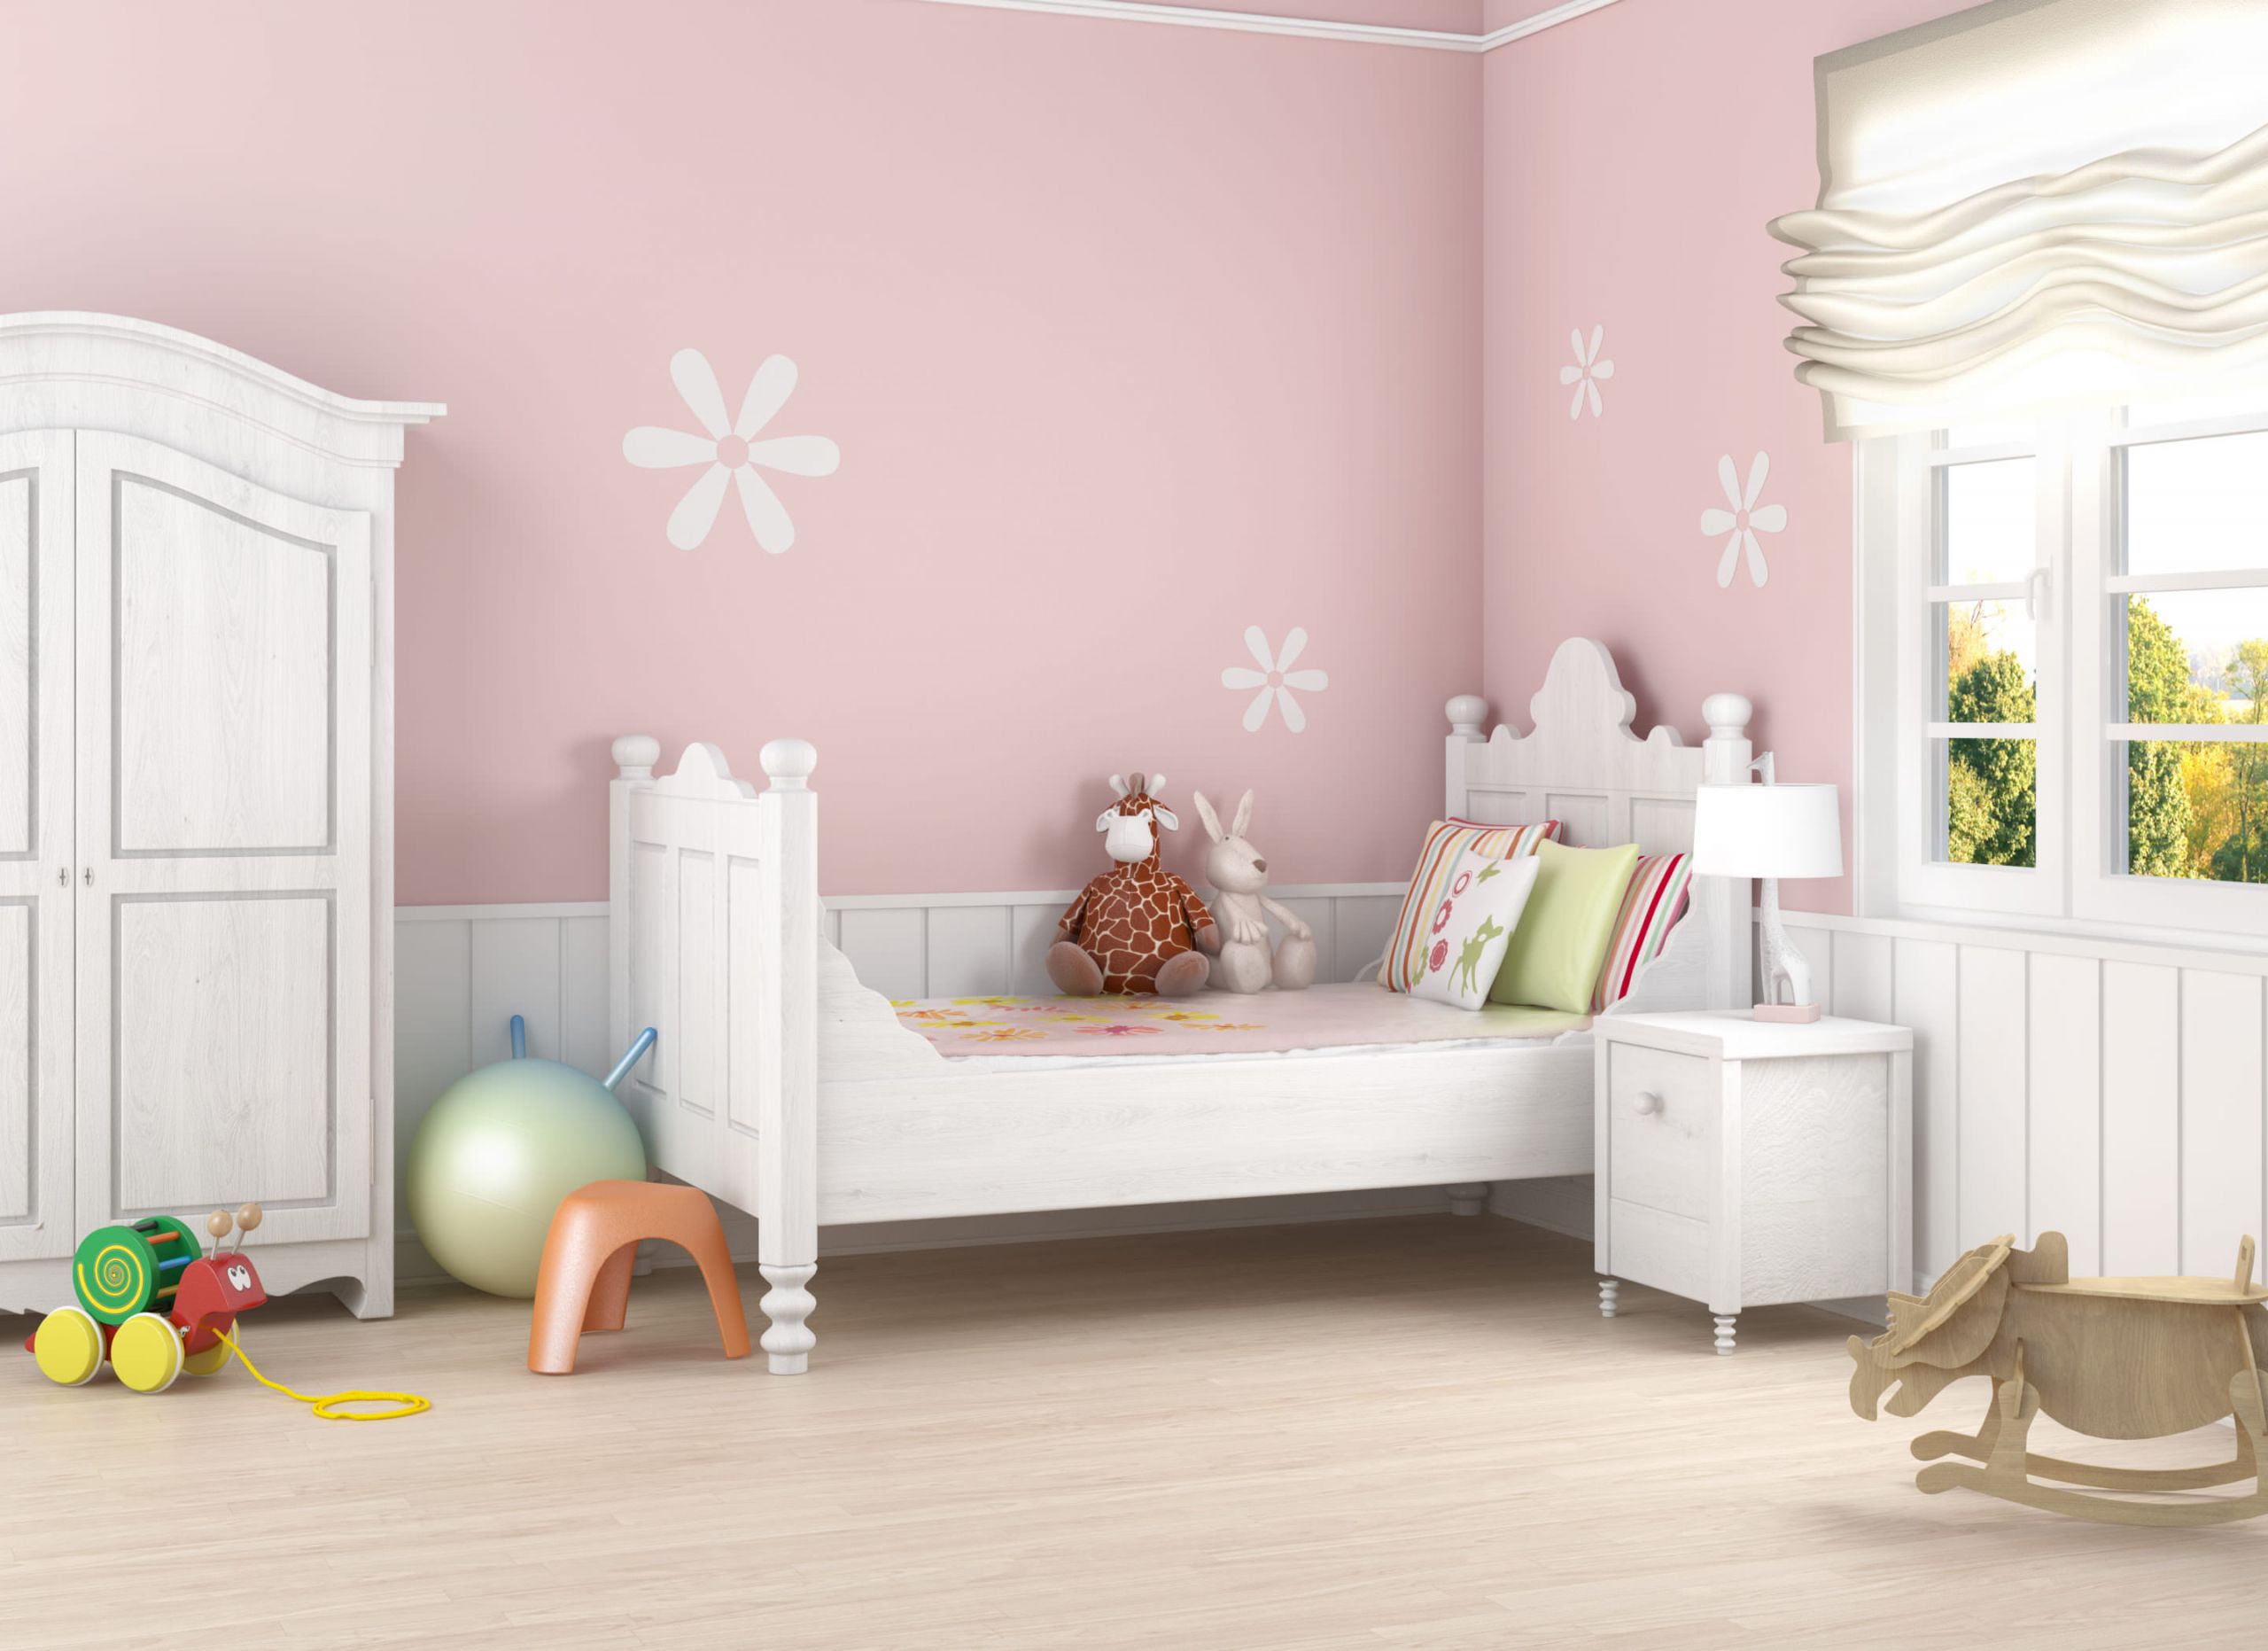 How To Paint Kids Room
 Kids Room Painting Services Children’s Room Painter